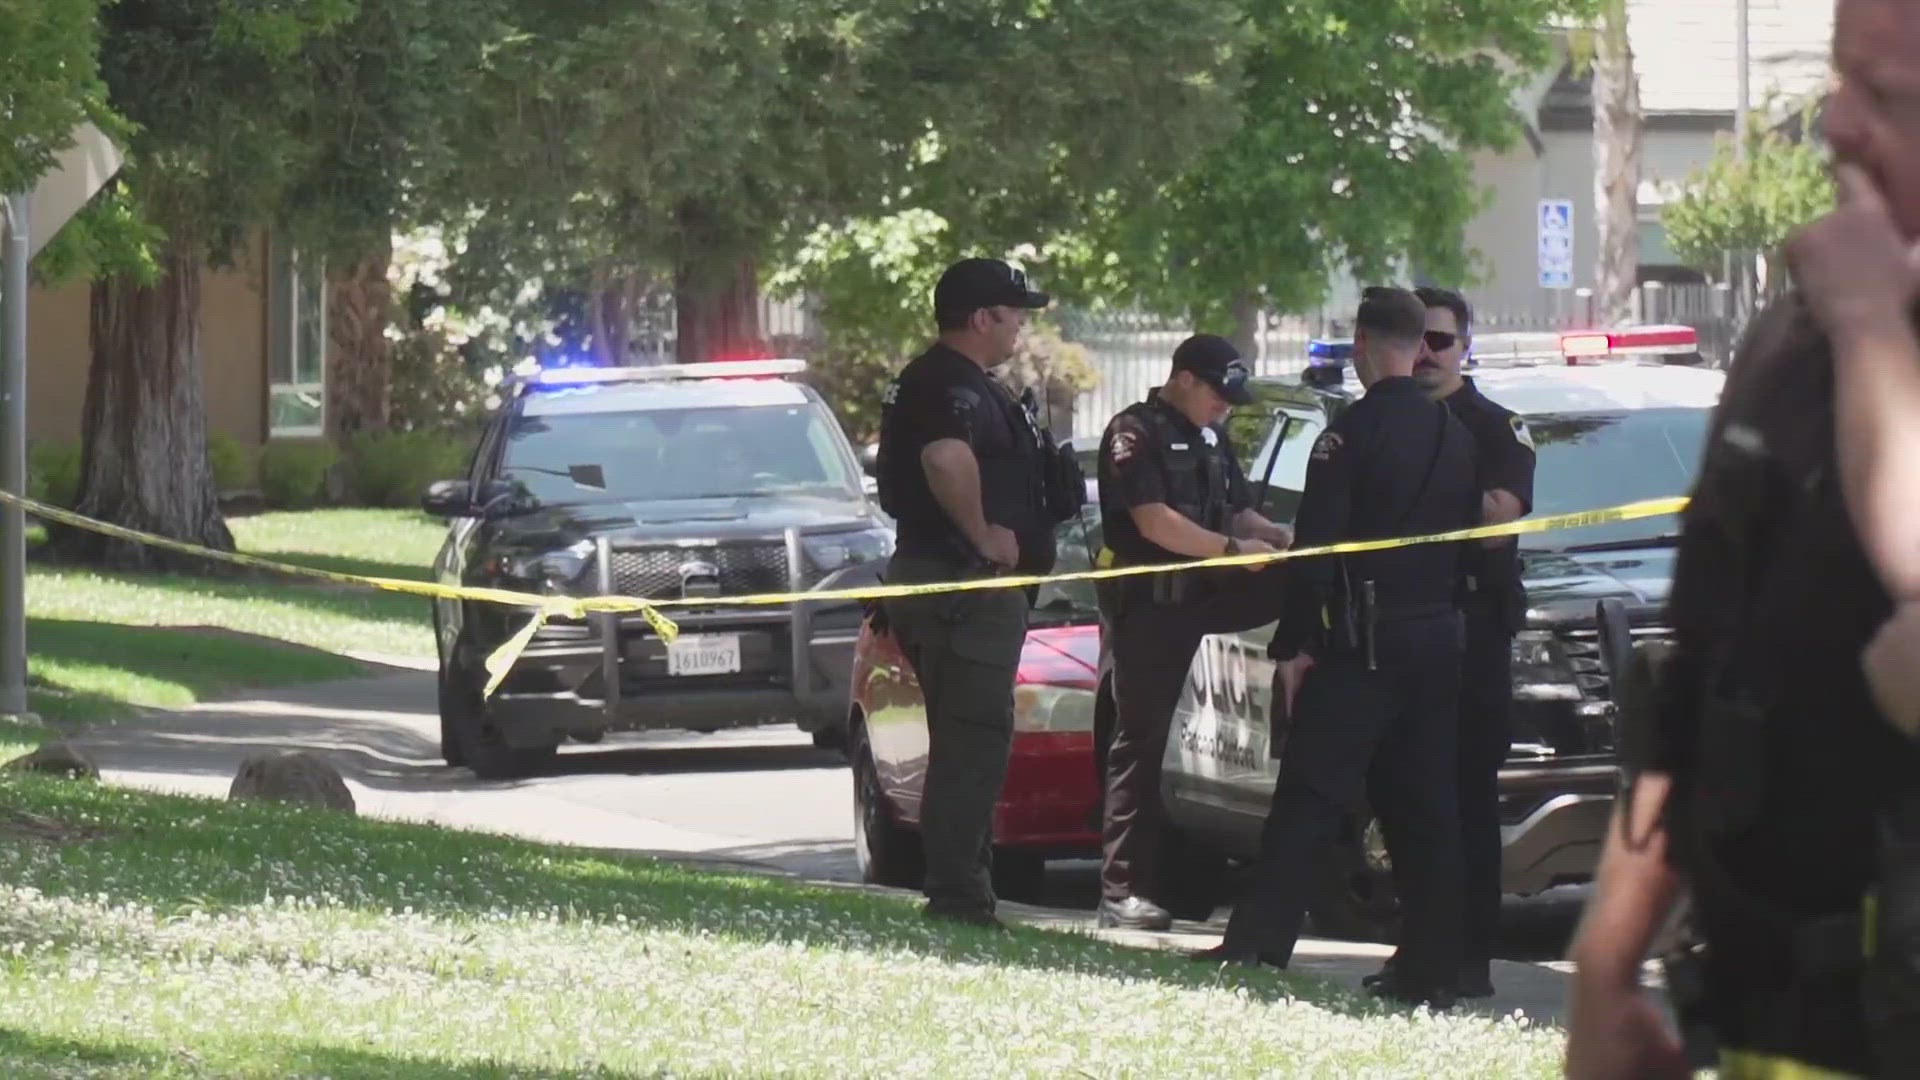 Around 1 p.m., Sacramento County Sheriff’s Office spokesman Sgt. Amar Gandhi said the woman was stabbed on the 10000 block of Rockingham Drive.